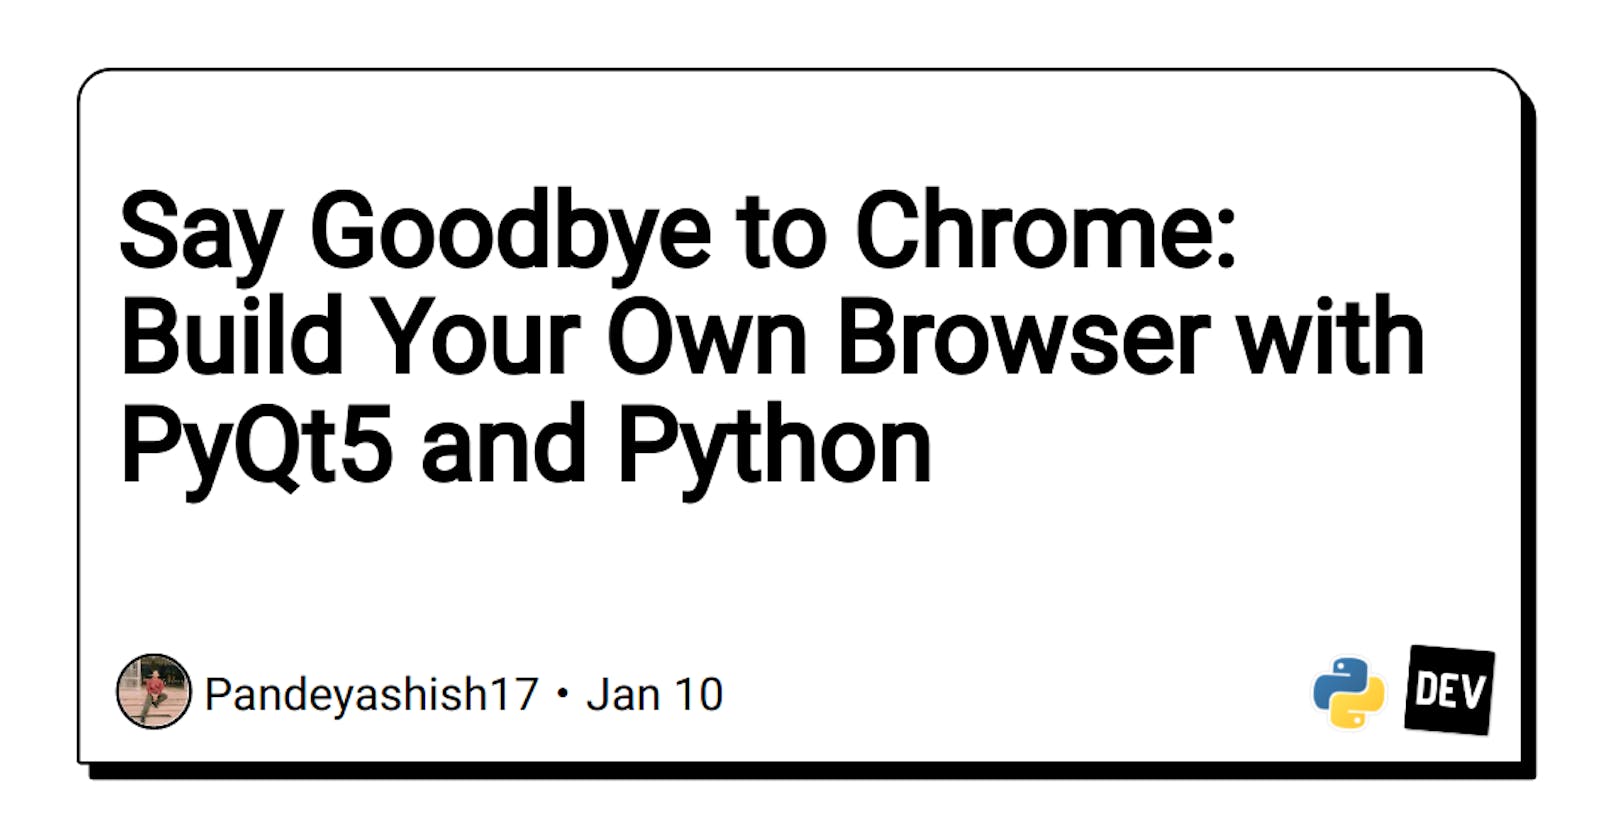 Say Goodbye to Chrome: Build Your Own Browser with PyQt5 and Python